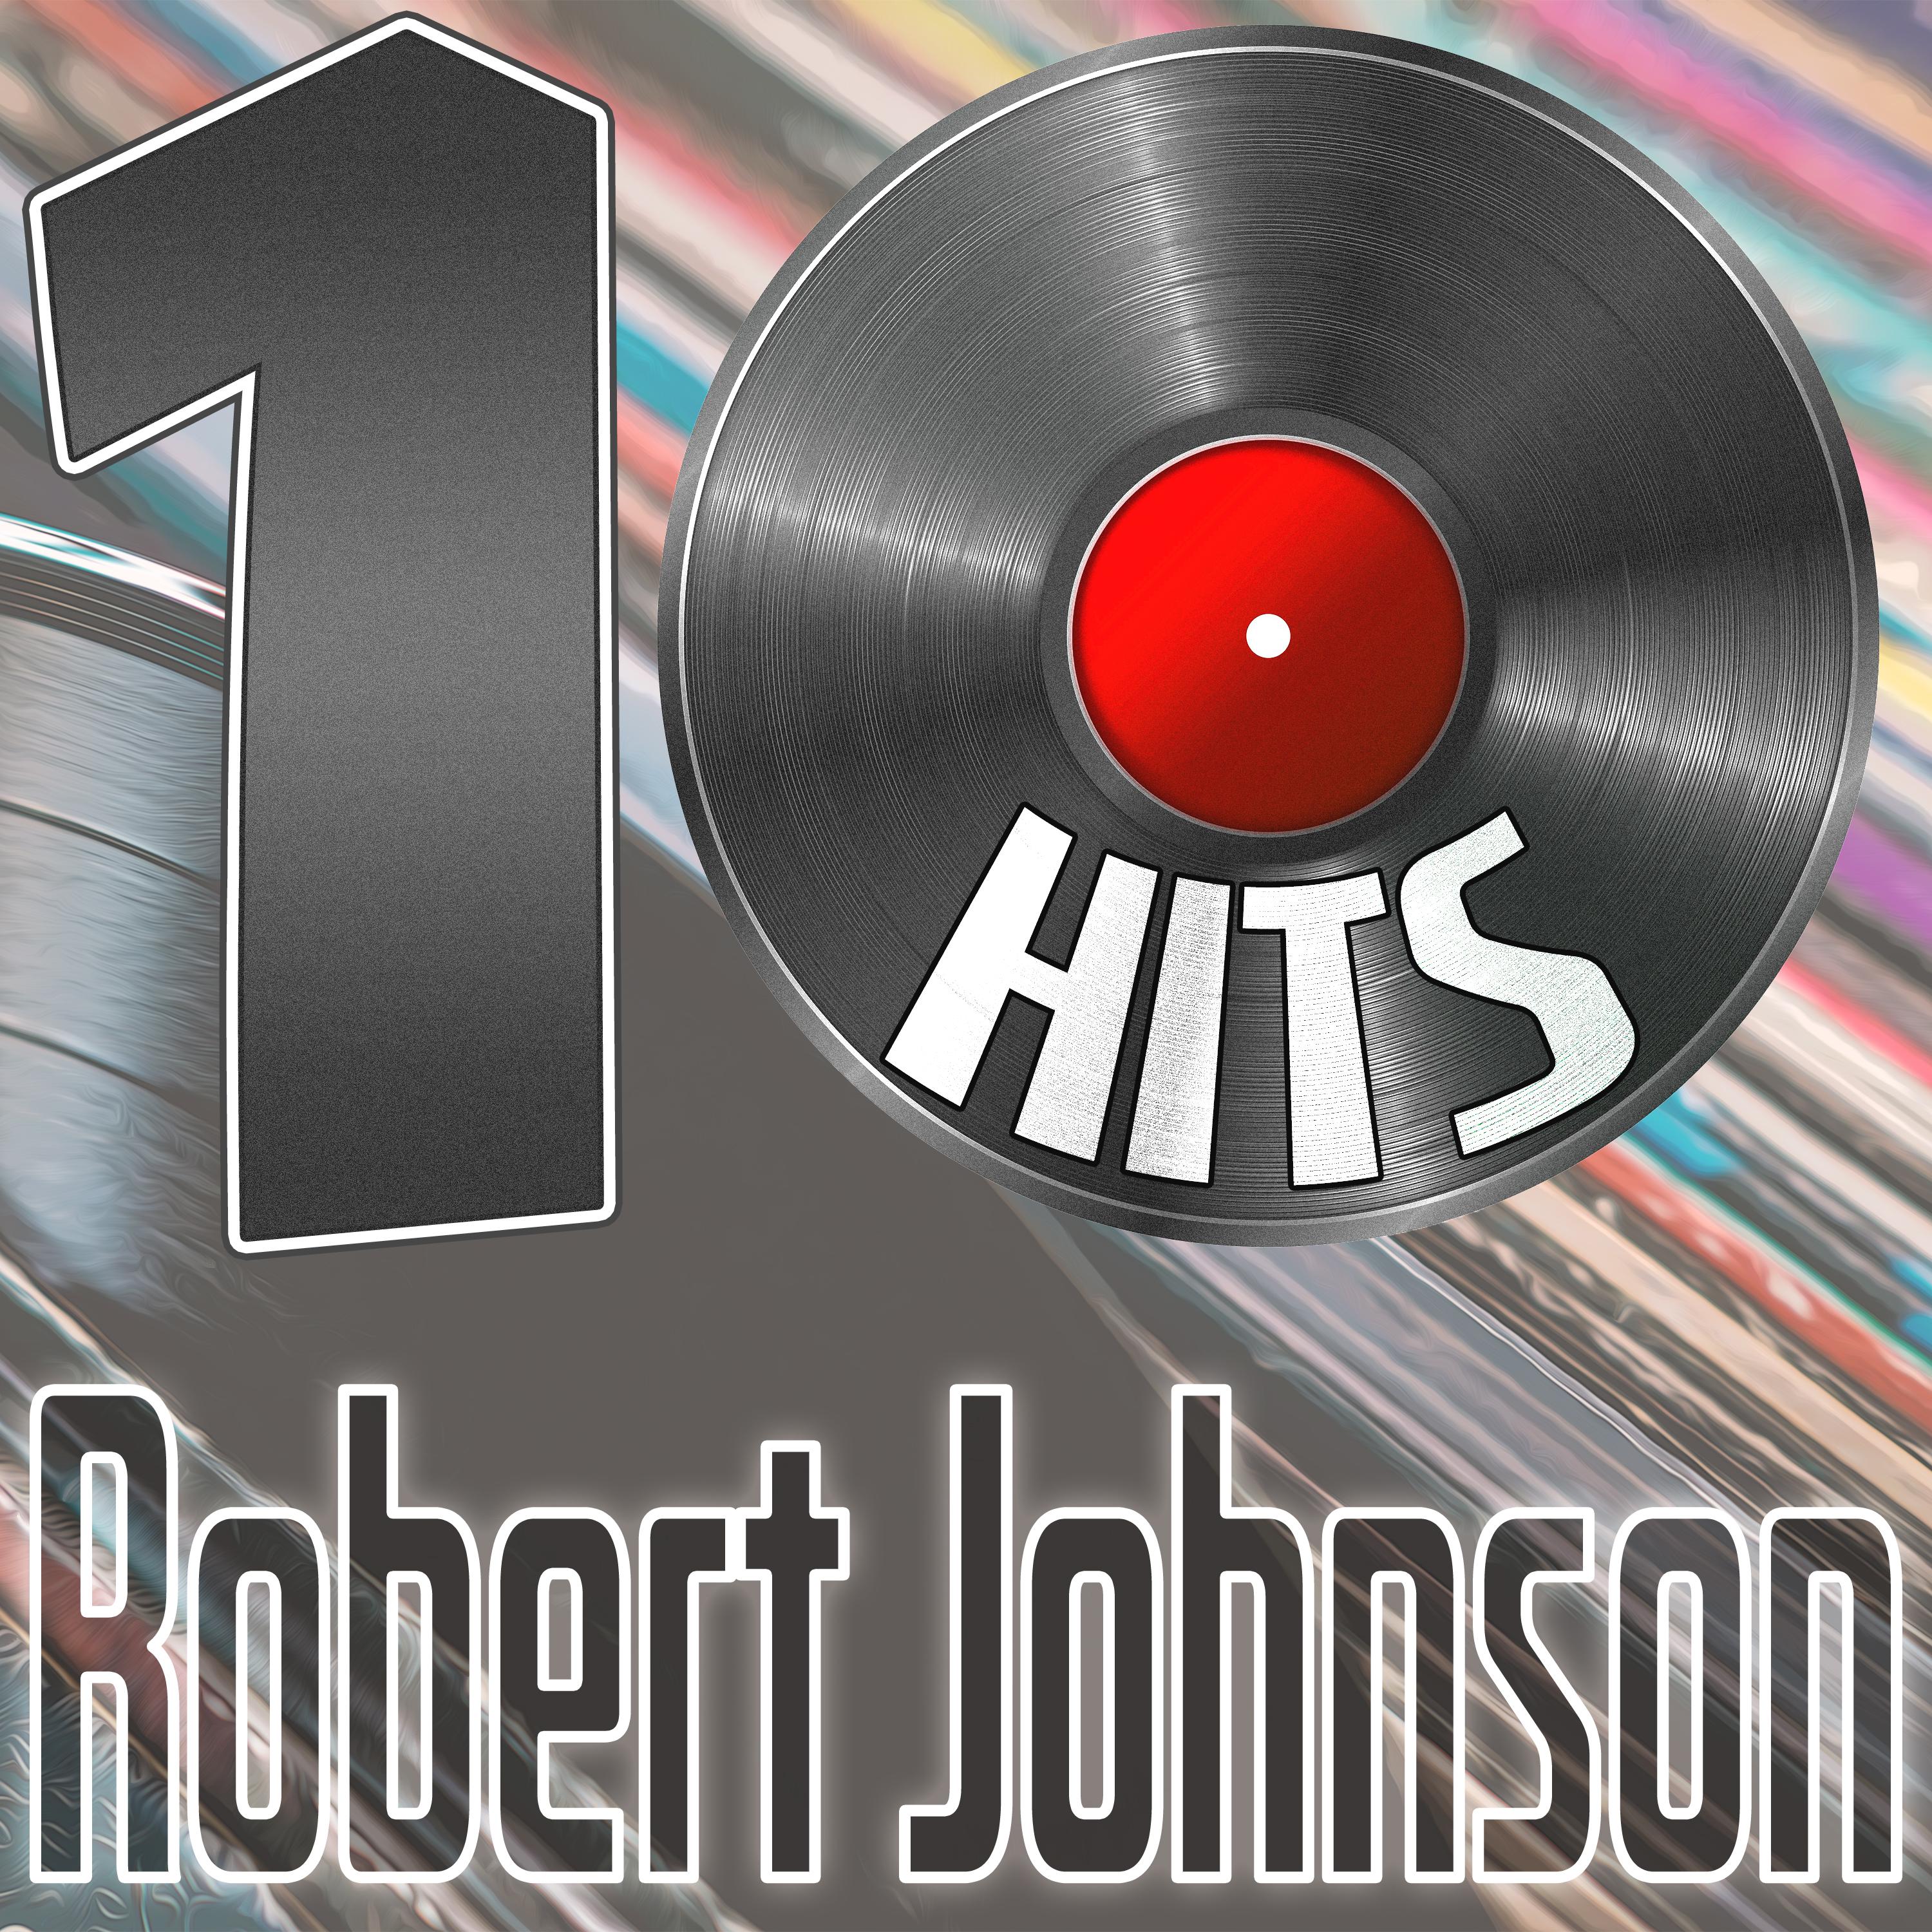 Robert Johnson - Kind Hearted Woman Blues (Remastered 2014)